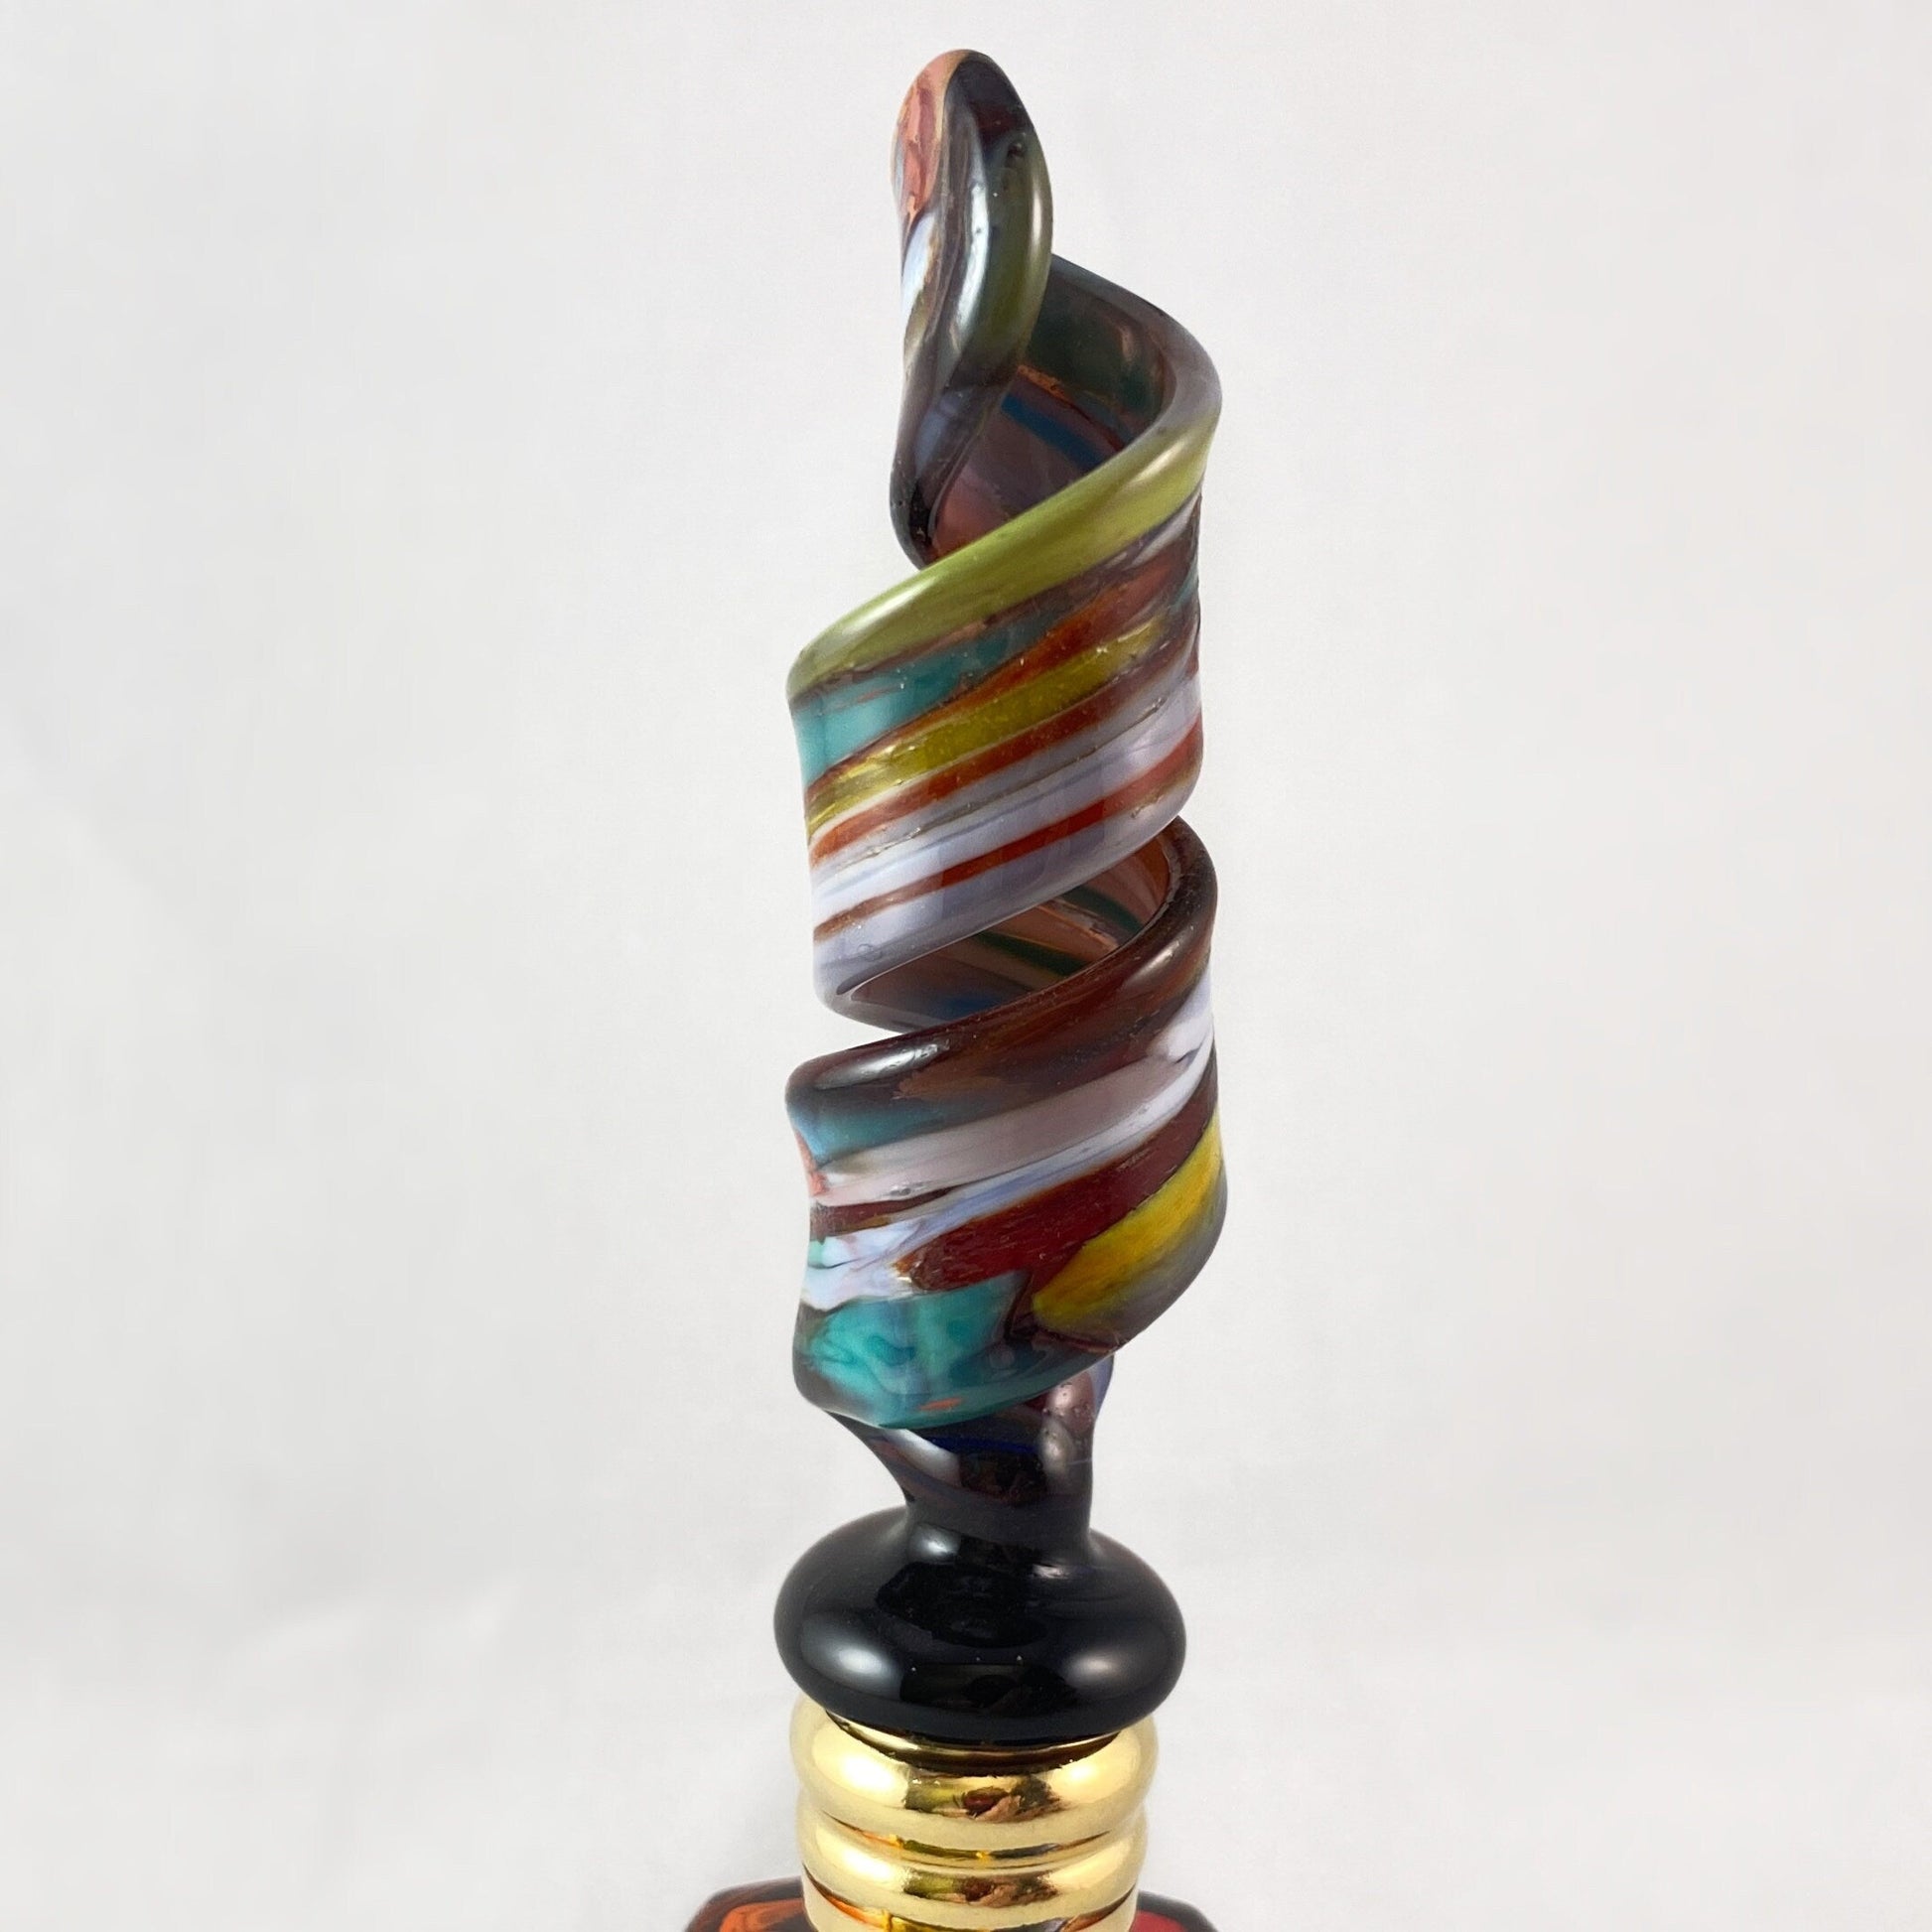 Curly Top Venetian Glass Perfume Bottle - Handmade in Italy, Colorful Murano Glass